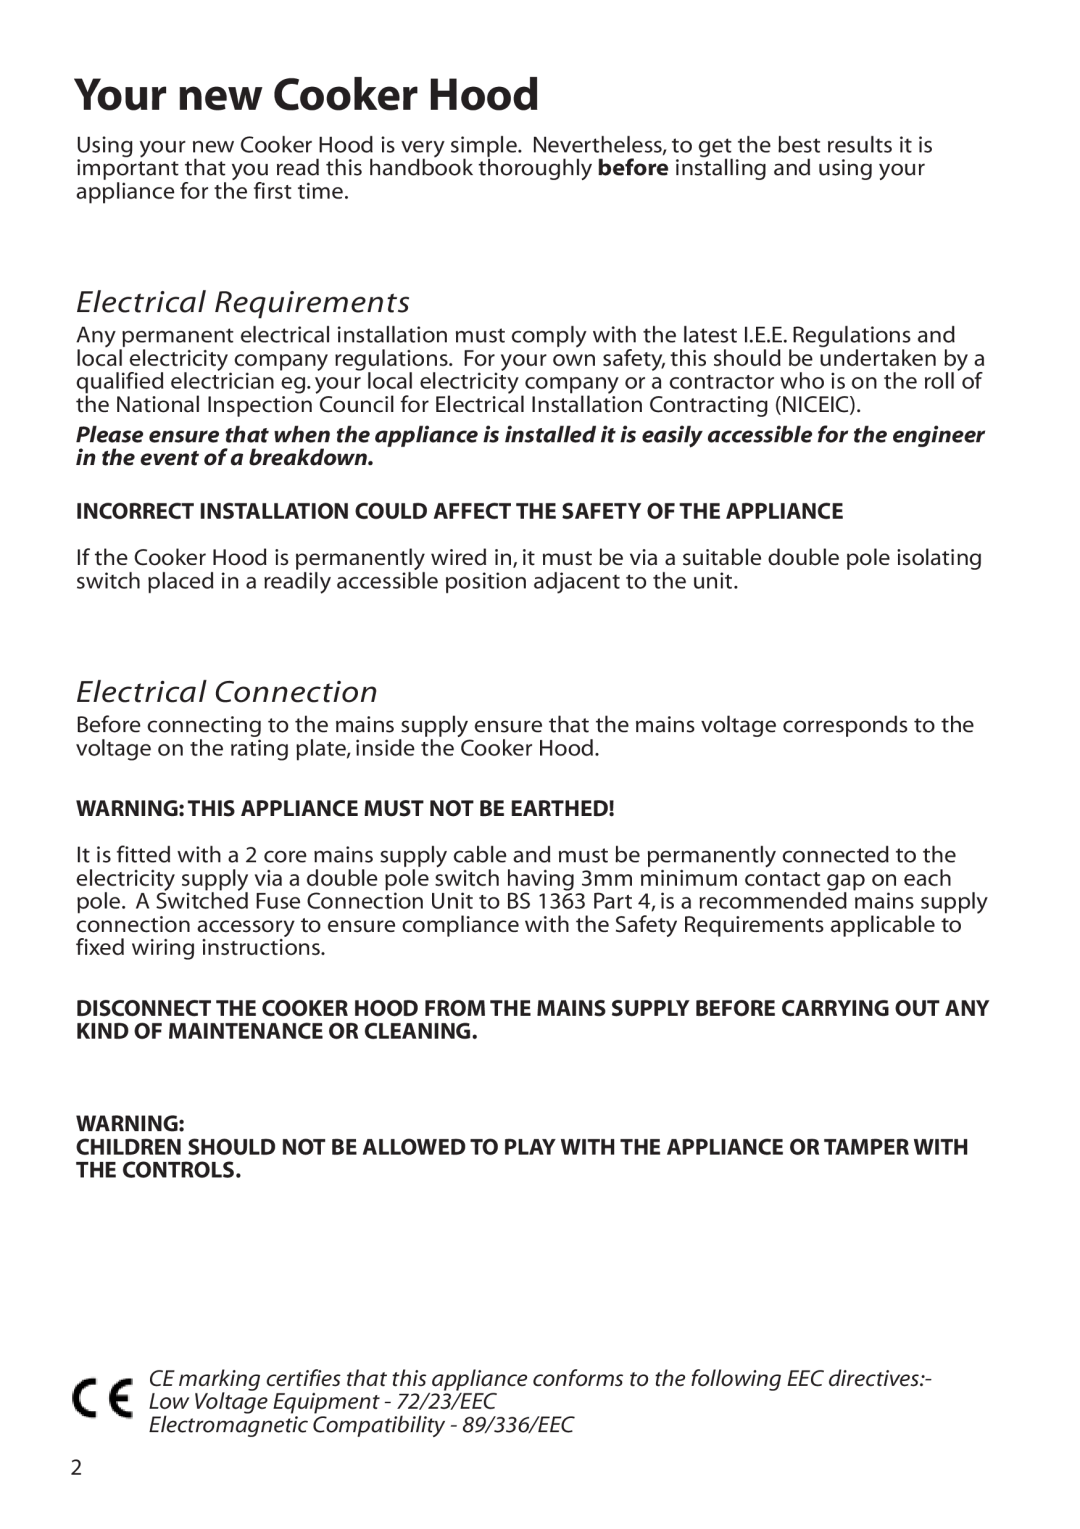 Hotpoint HTU30 manual Your new Cooker Hood, Electrical Requirements, Electrical Connection 